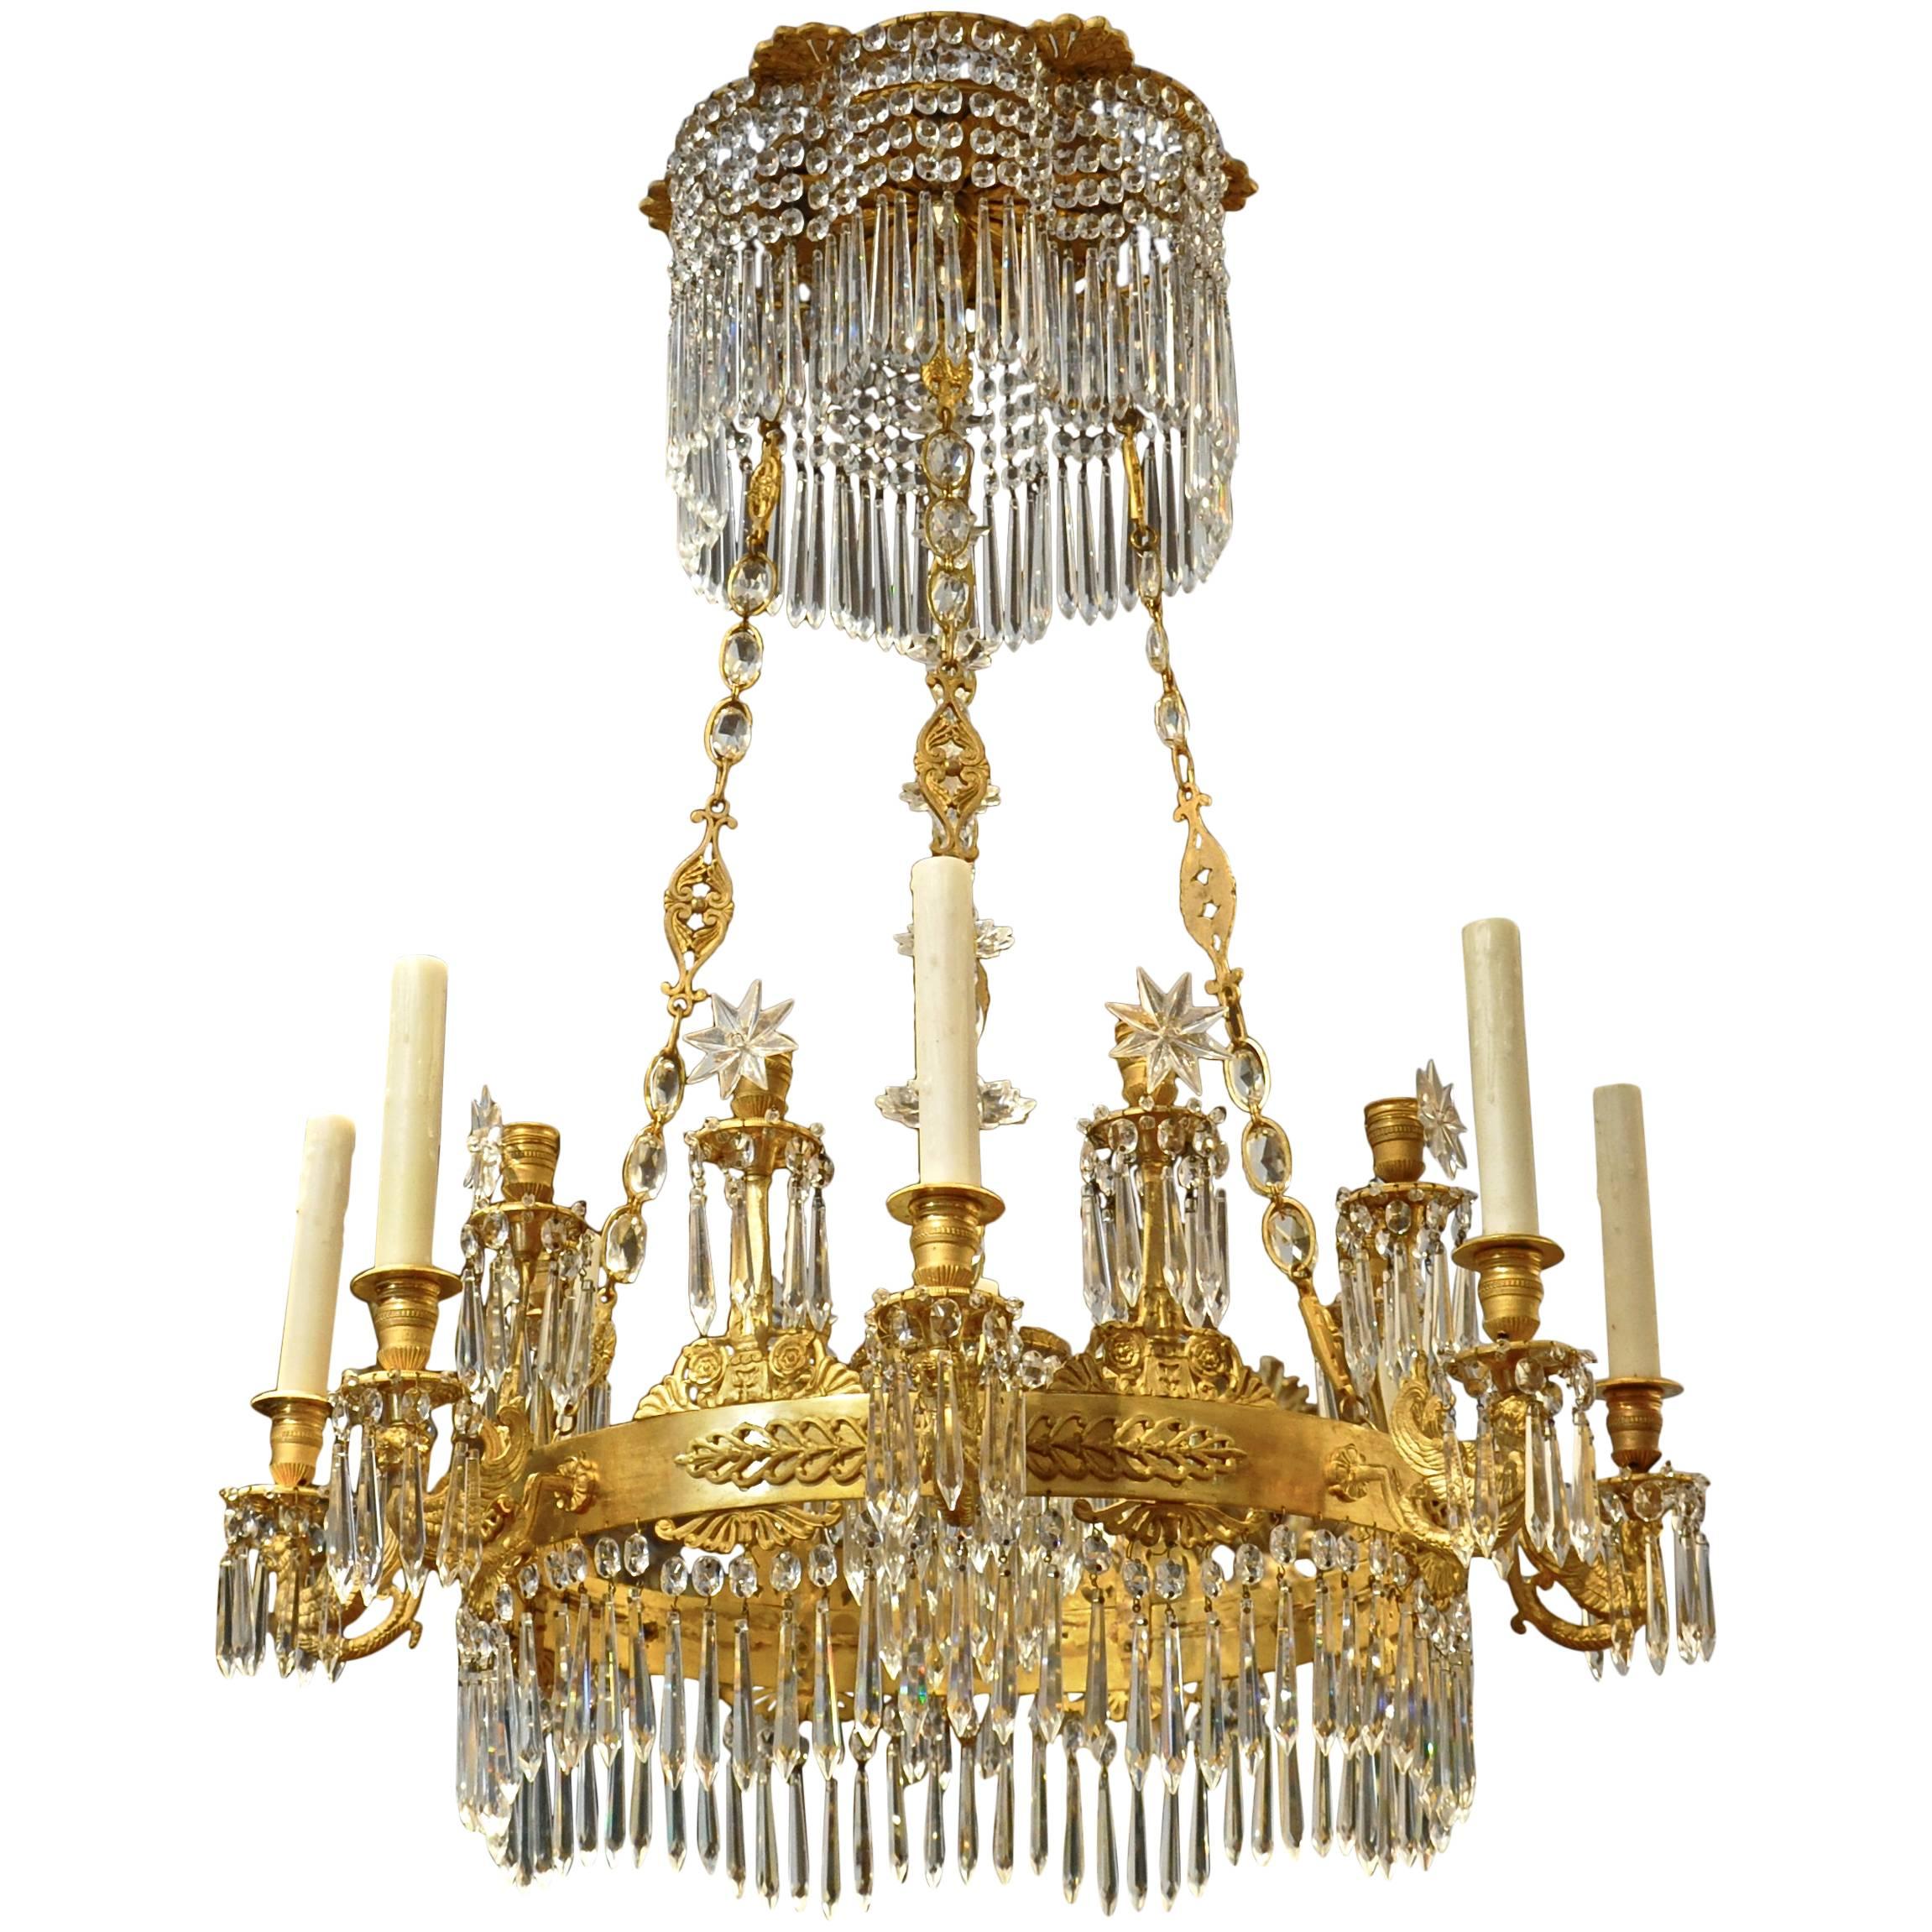 Period Russian Empire chandelier.

Eight-winged lion candle arms.
Palmettes and torches.
Original crystals intact.
Beautiful acanthus crown.

This amazing chandelier is shown without and with a cobalt blue glass plate as options

Was French